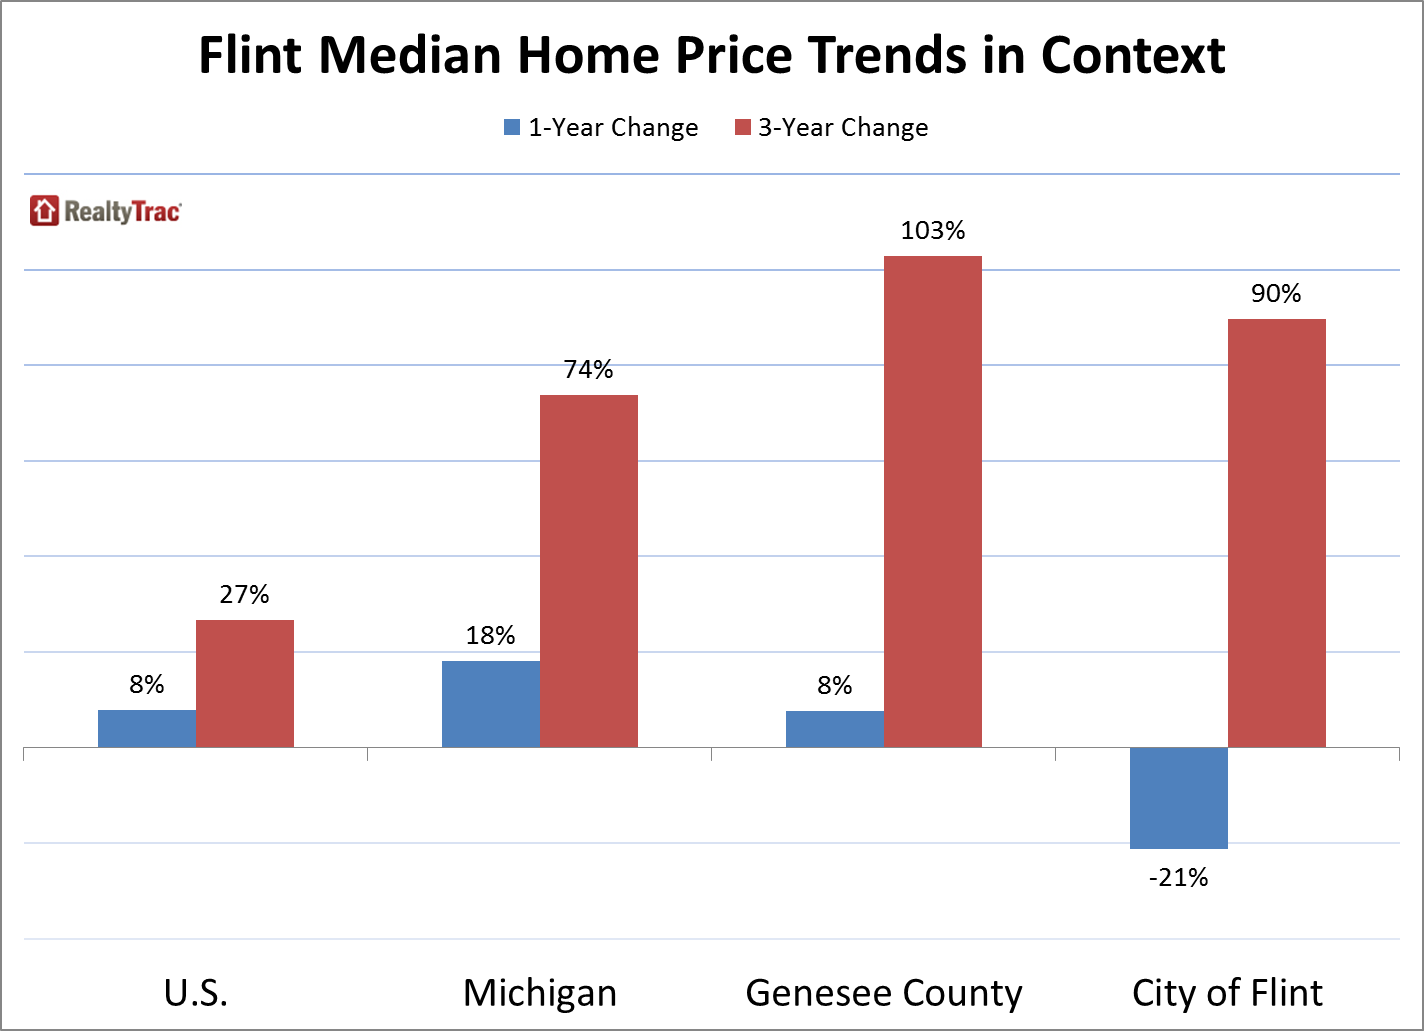 The impact on the Flint housing market: a nascent real estate recovery that abruptly reversed course in early 2016 after the crisis escalated.